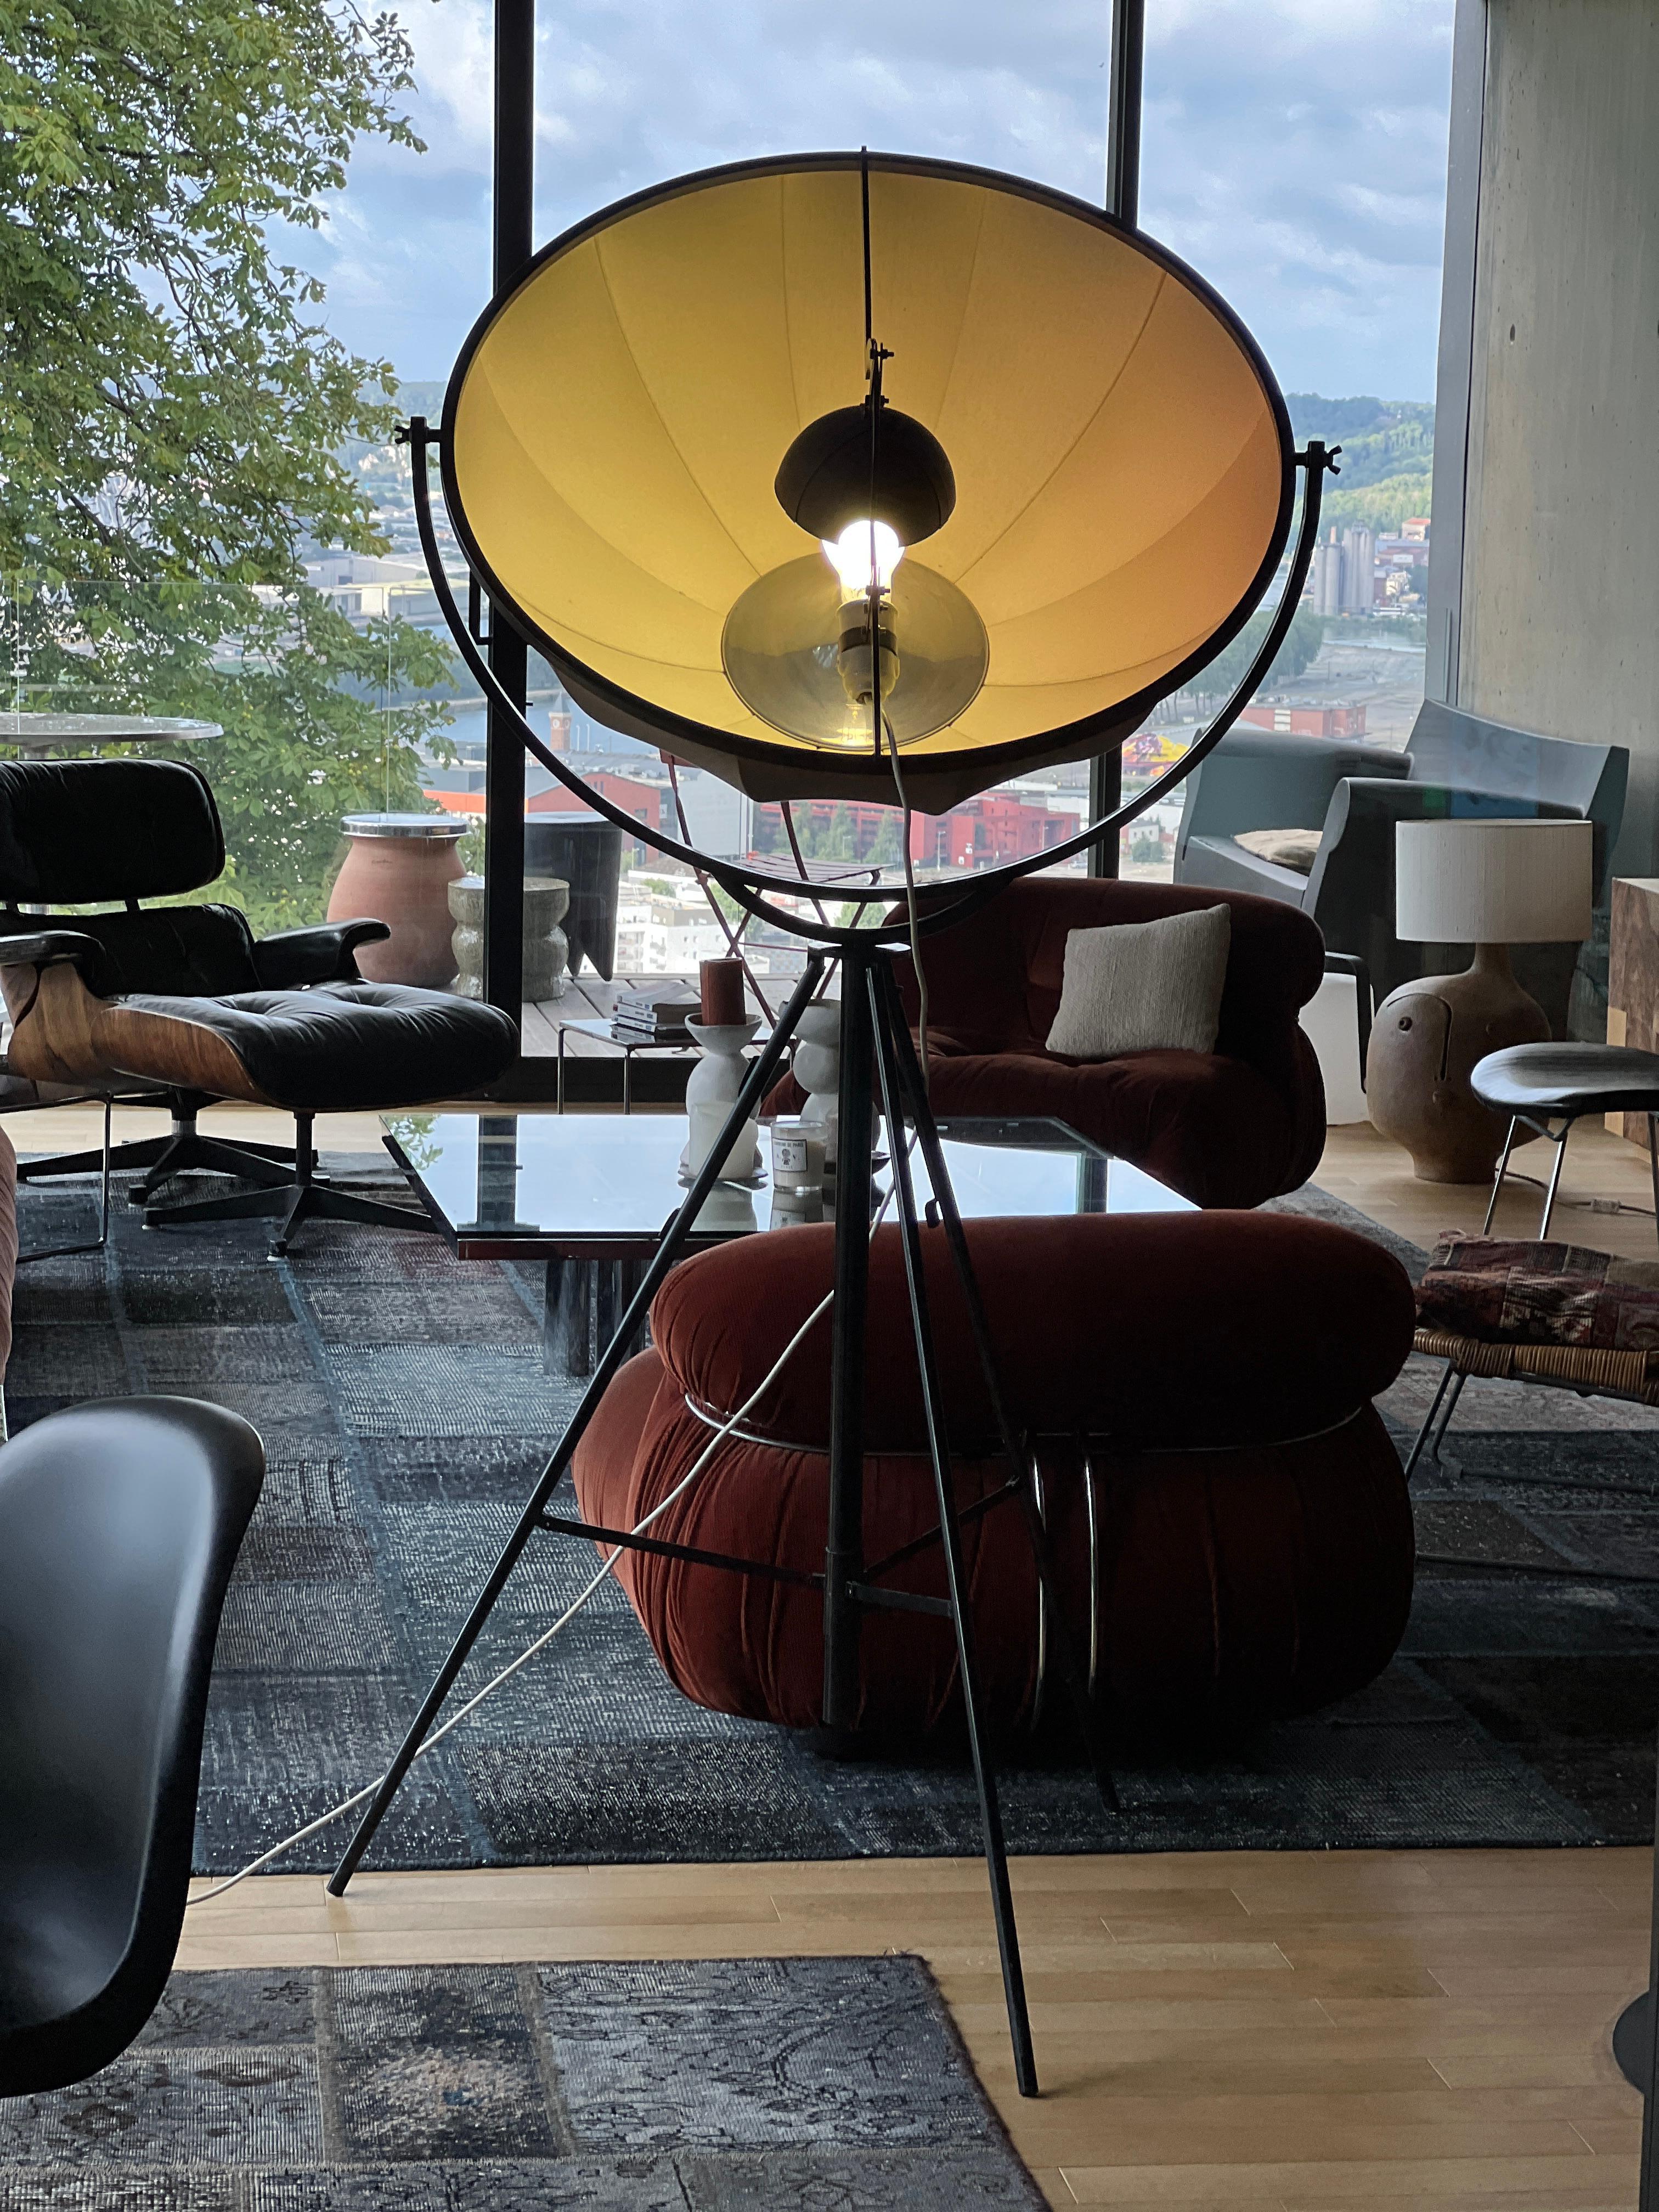 Mariano Fortuny for Écart International , floor lamp Circa 1980
Authentic 80s version of the iconic Italian floor lamp in metal and fabric designed by Mariano Fortuny in 1907. The wide adjustable shade and tripod base diffuse a comfortable indirect